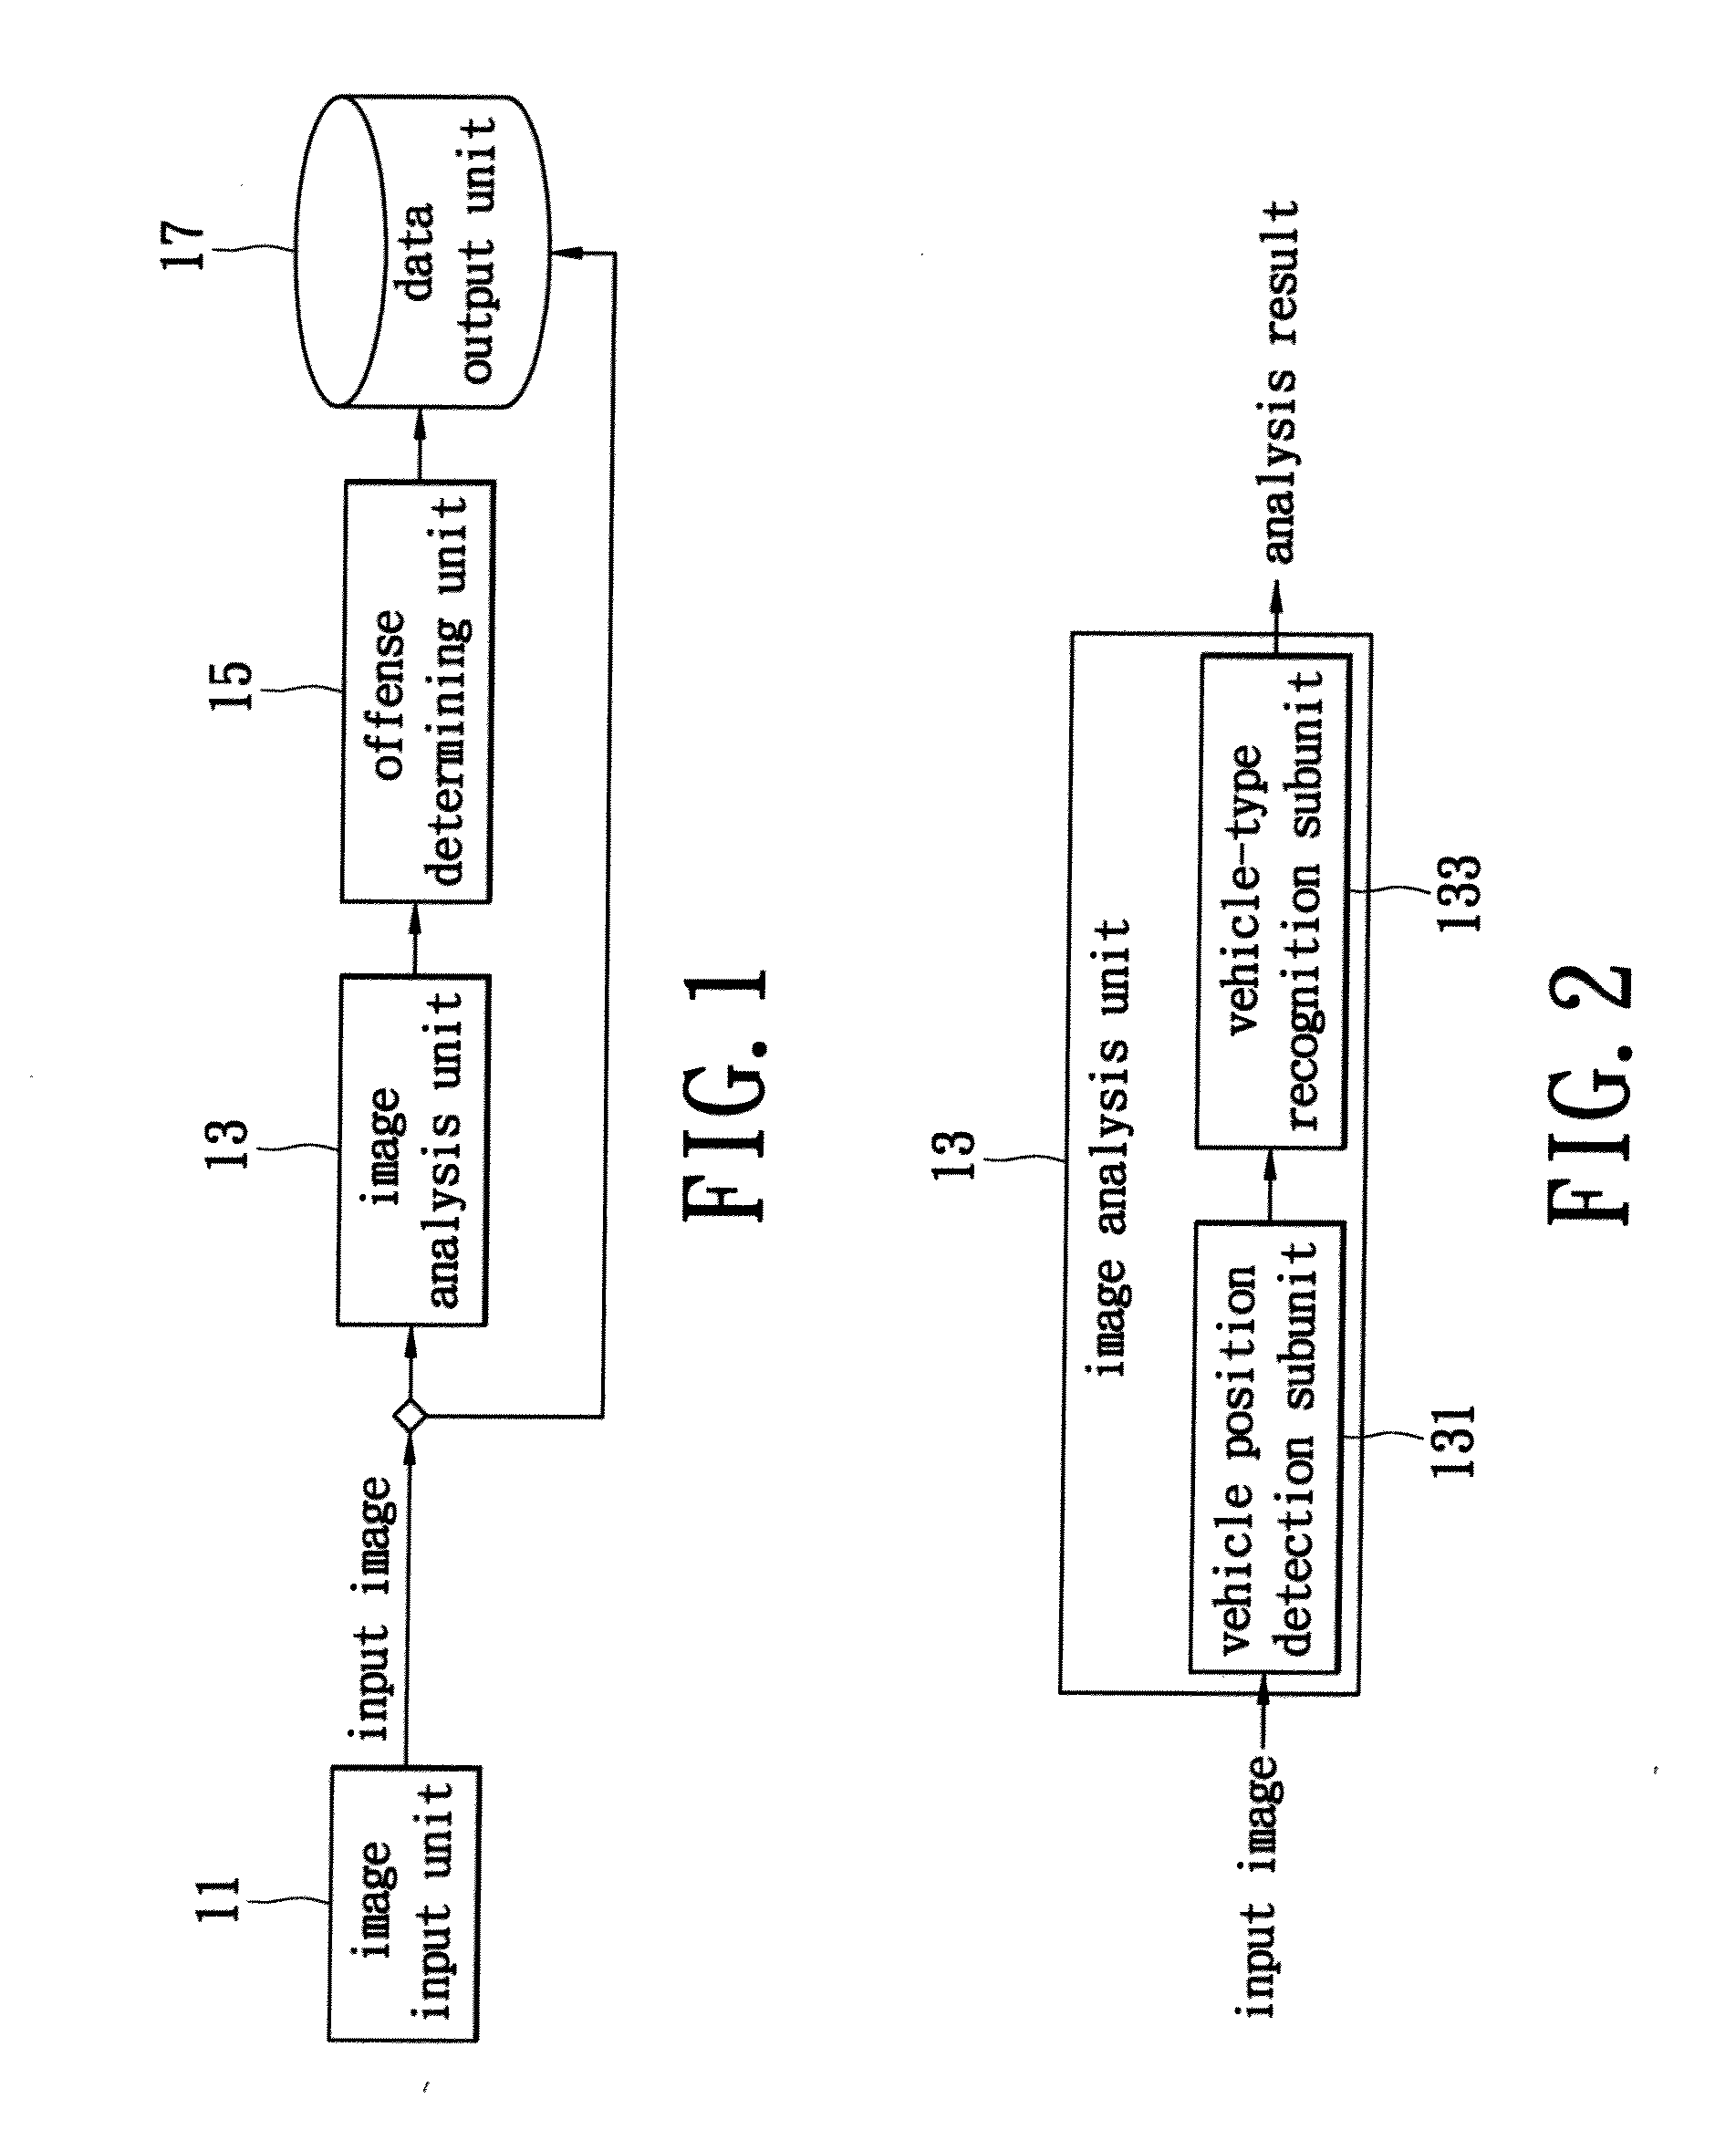 Automatic traffic violation detection system and method of the same